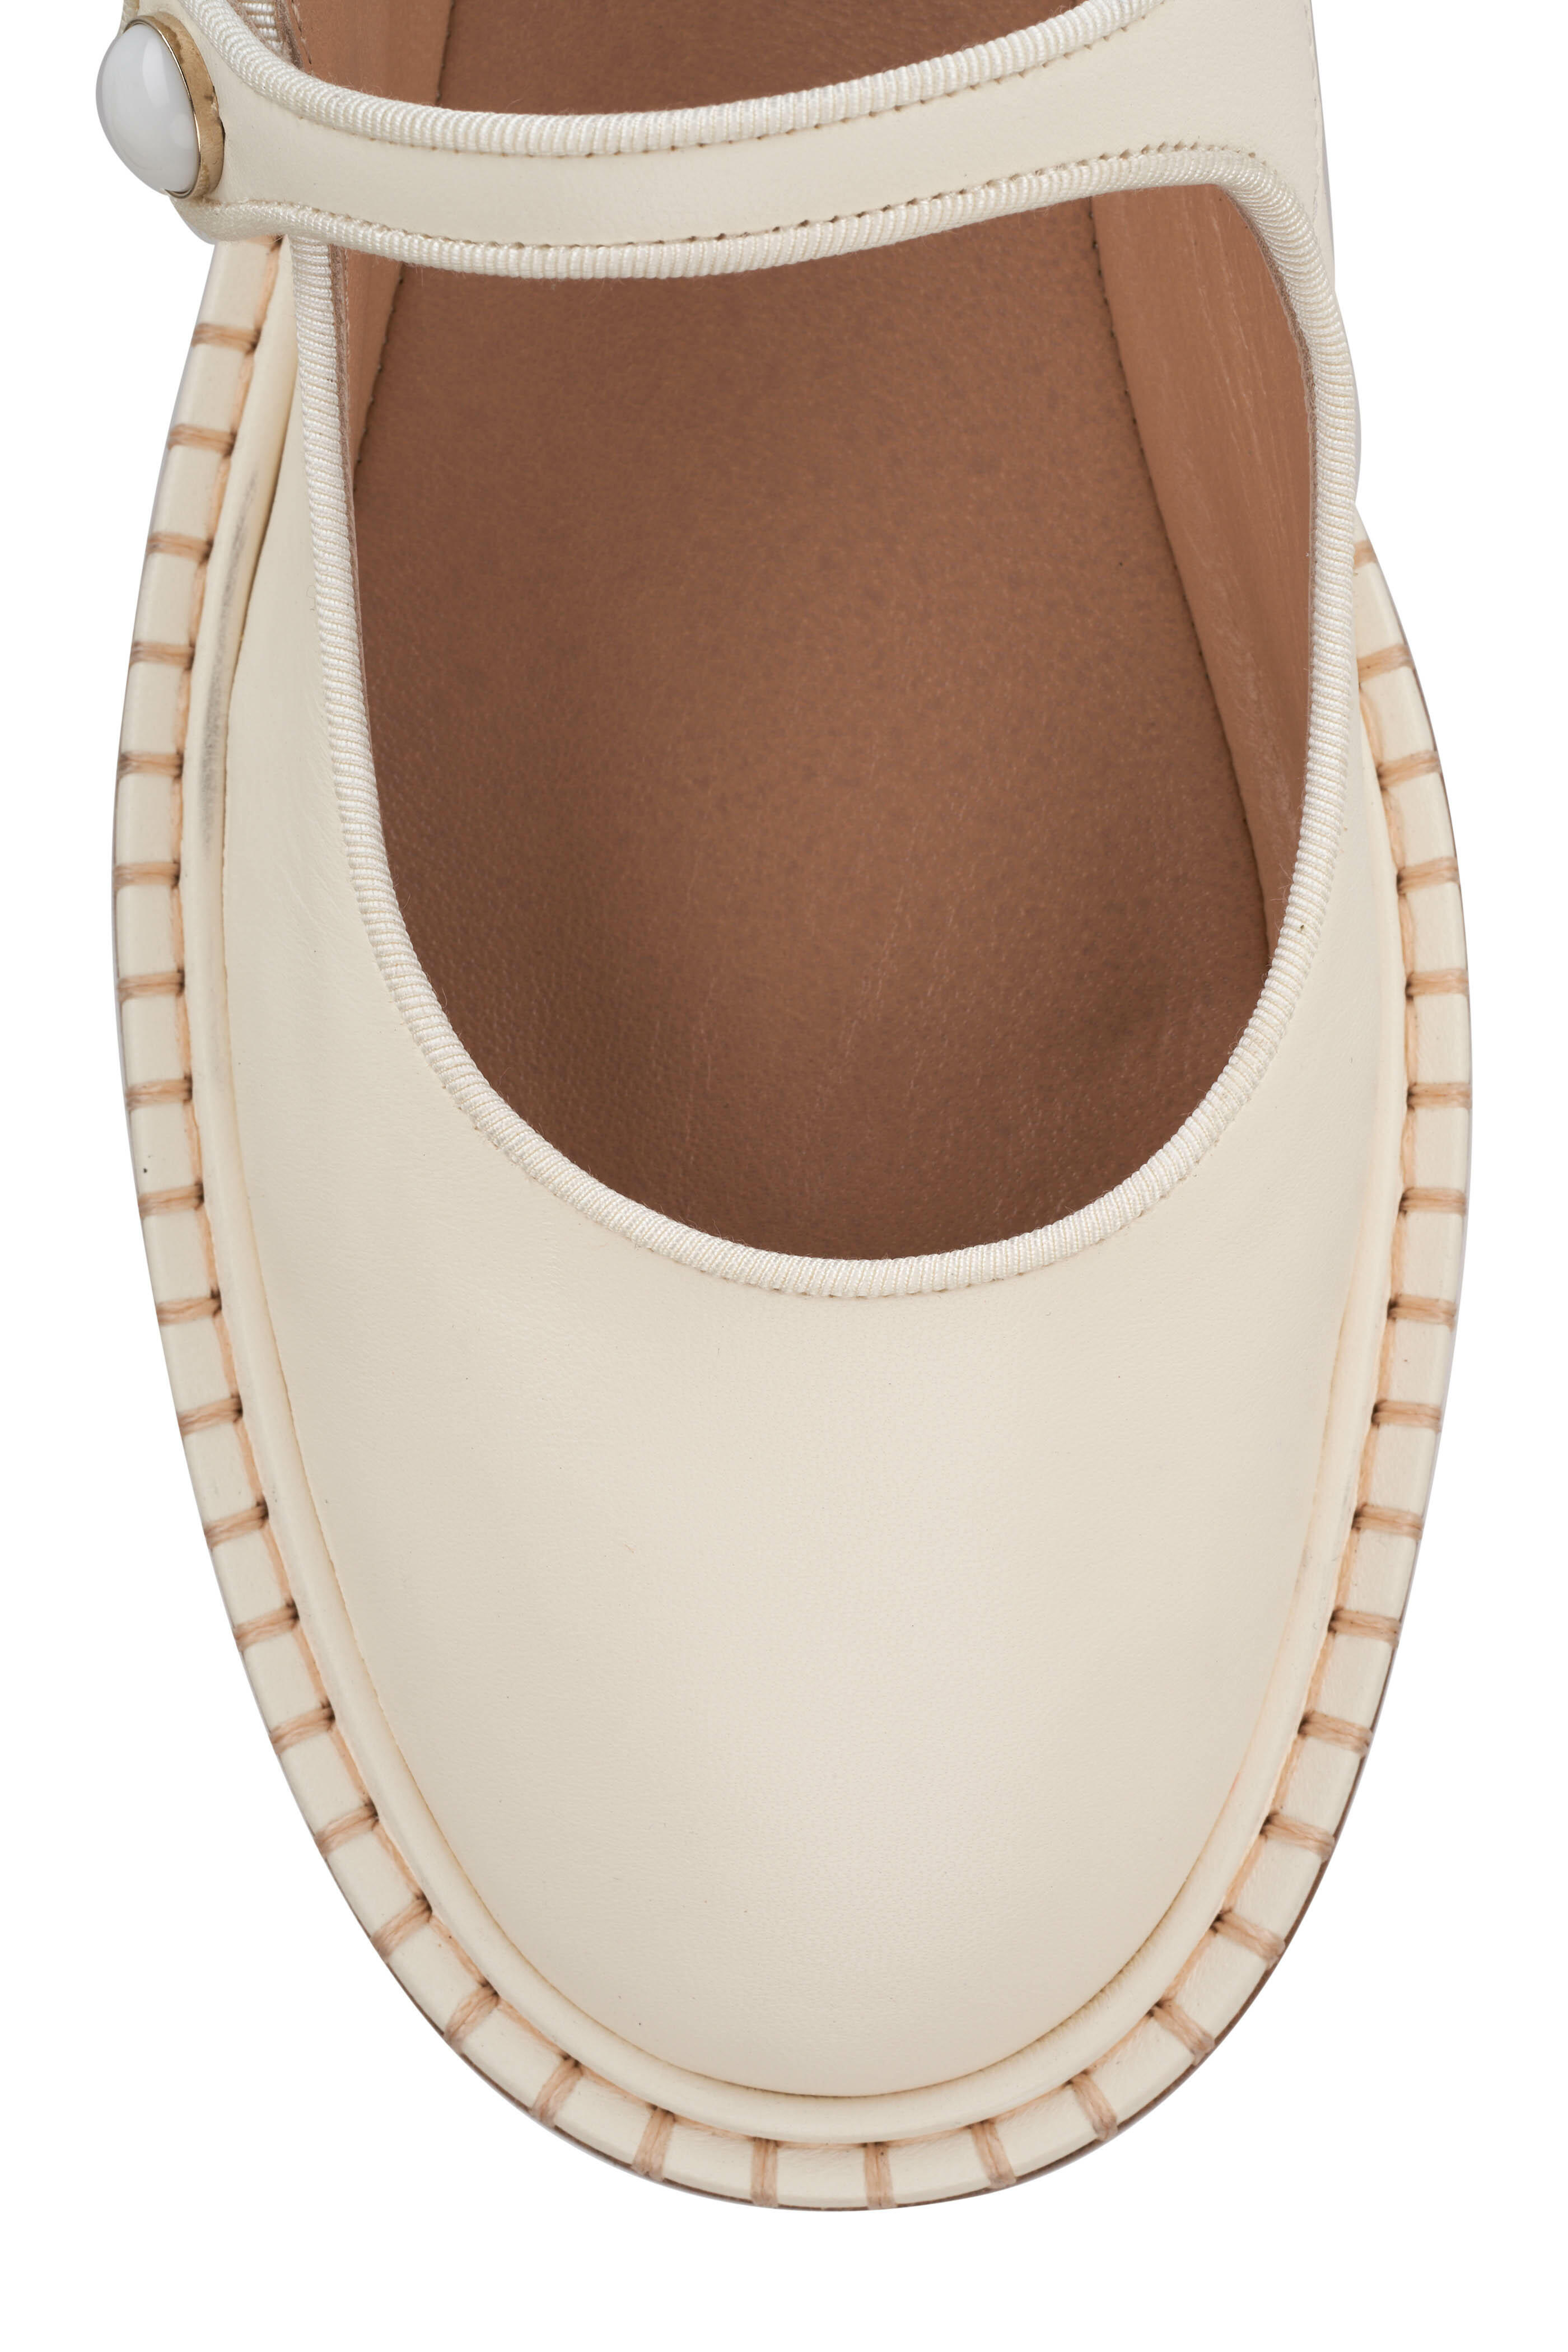 Chloé - Rubie Cloudy White Leather Mary Jane Ballet Flat